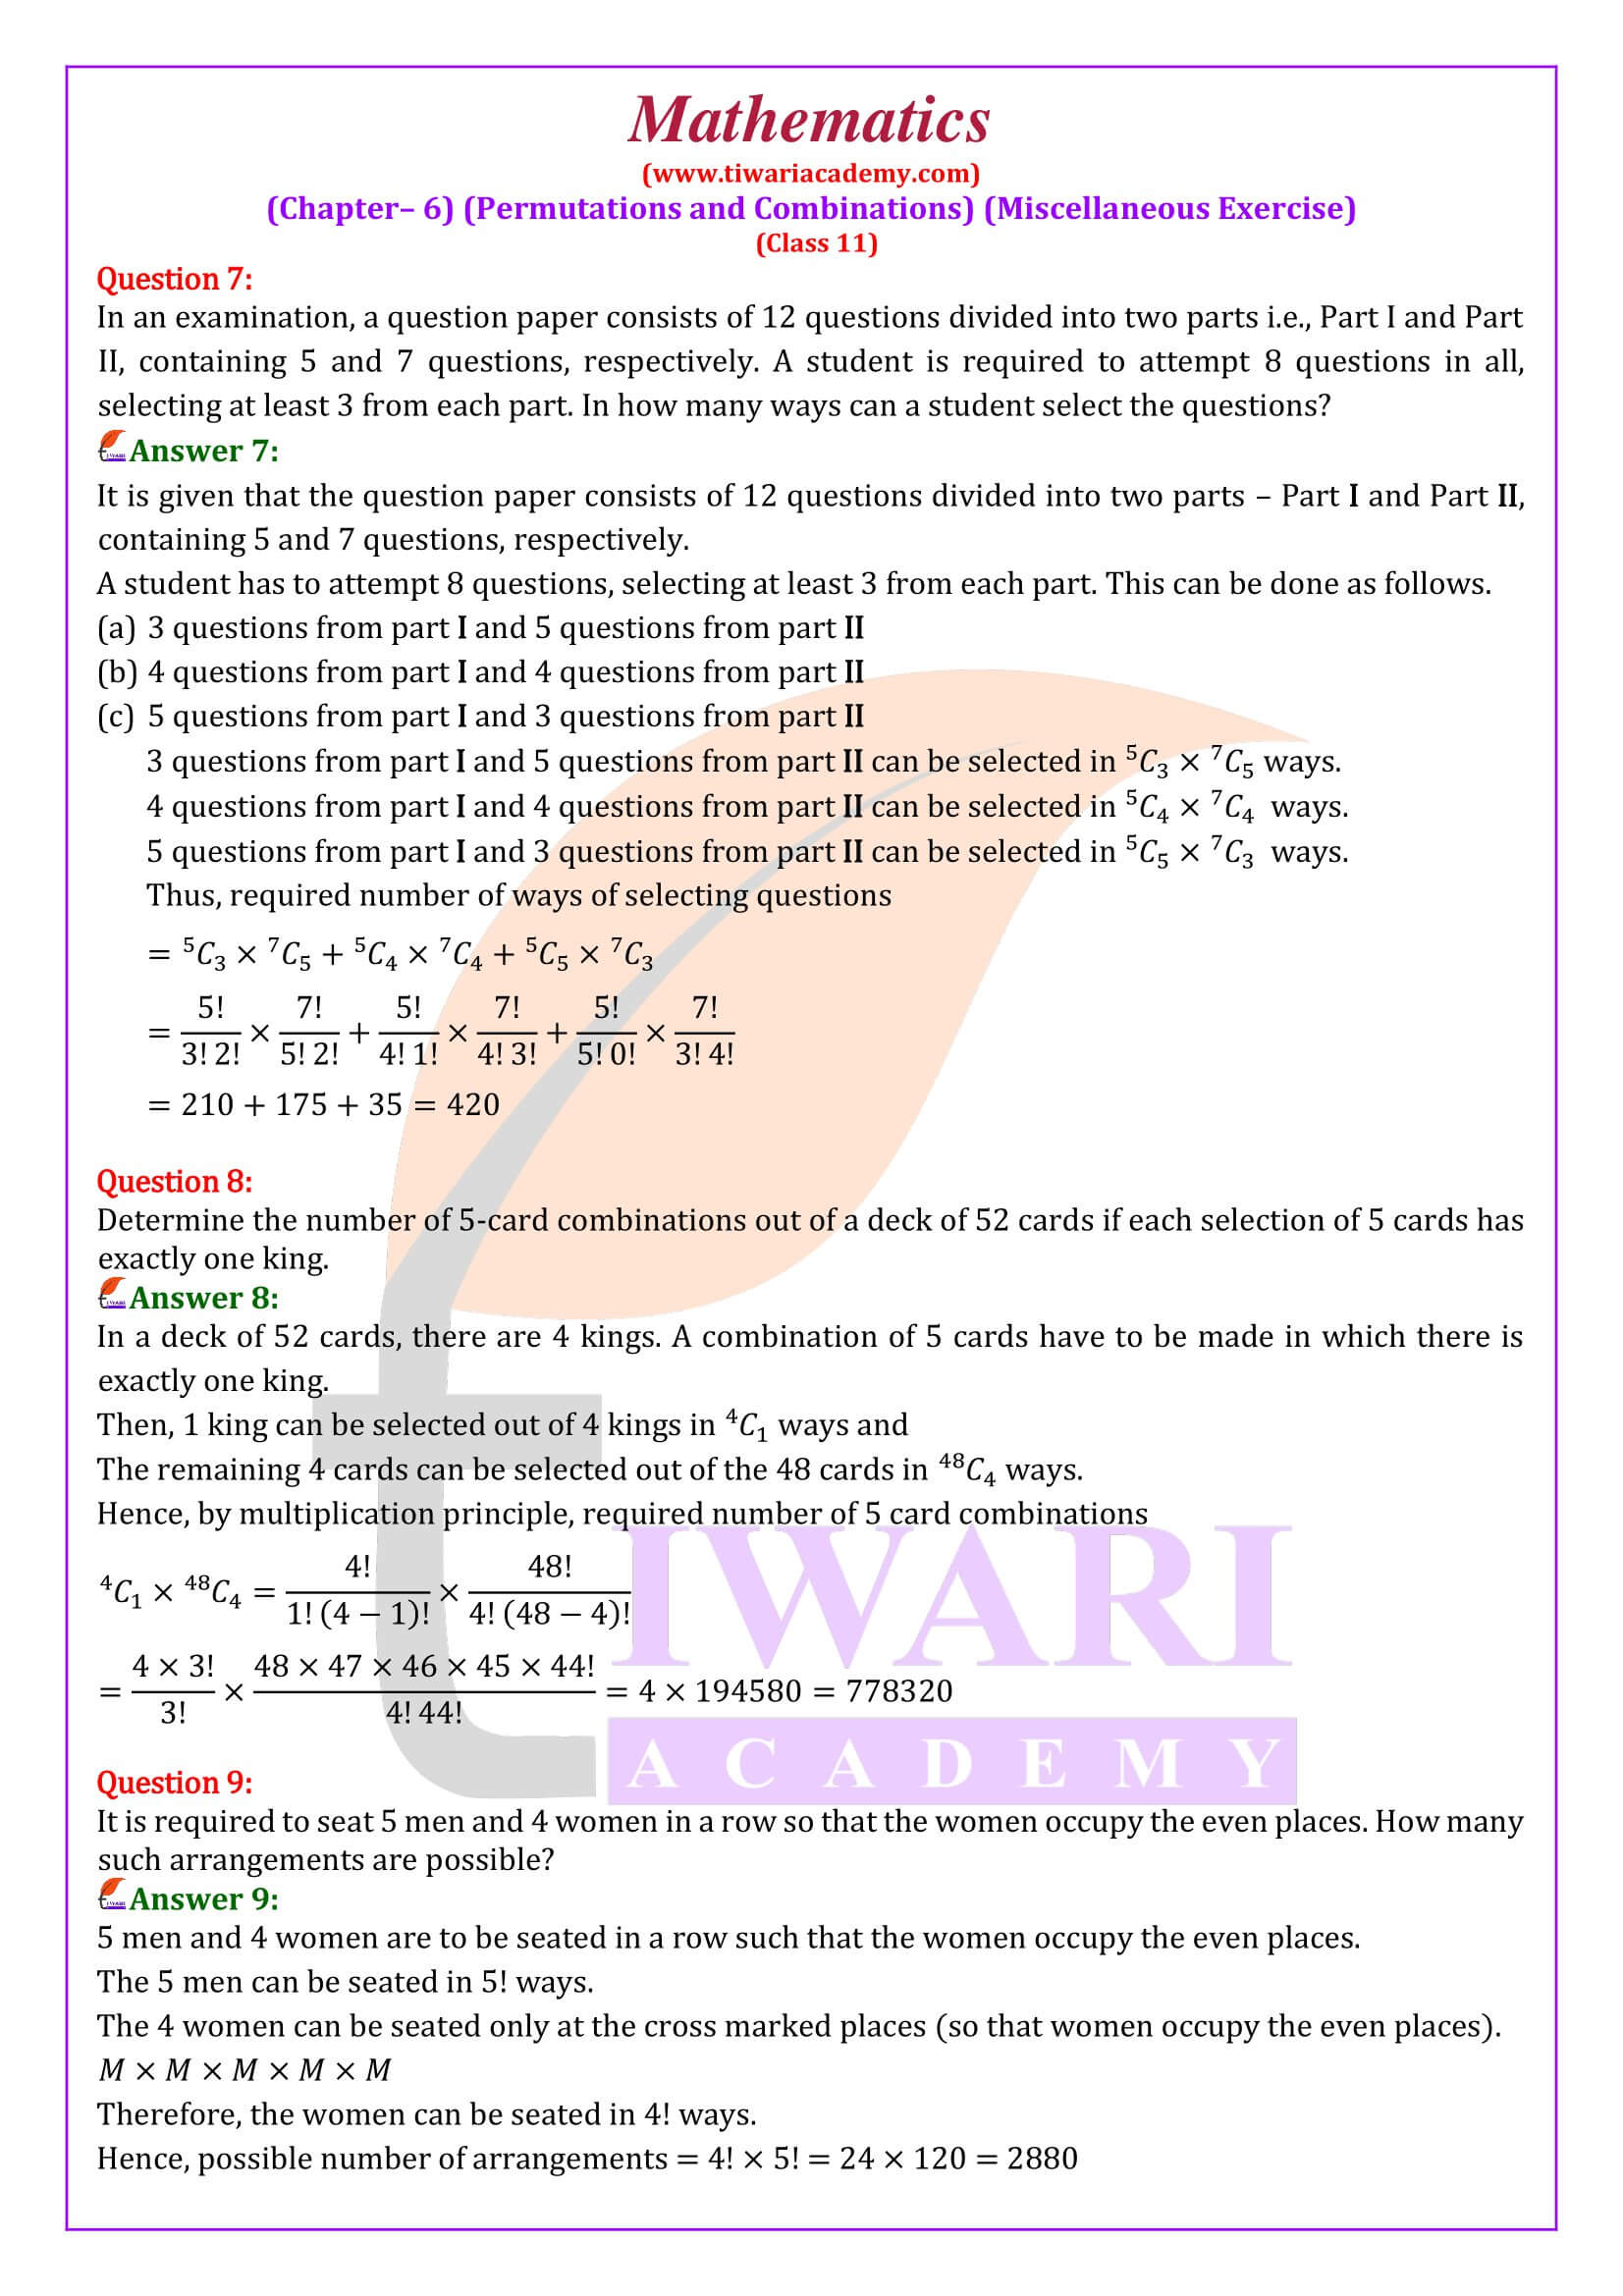 Class 11 Maths Chapter 6 Miscellaneous Exercise solution free